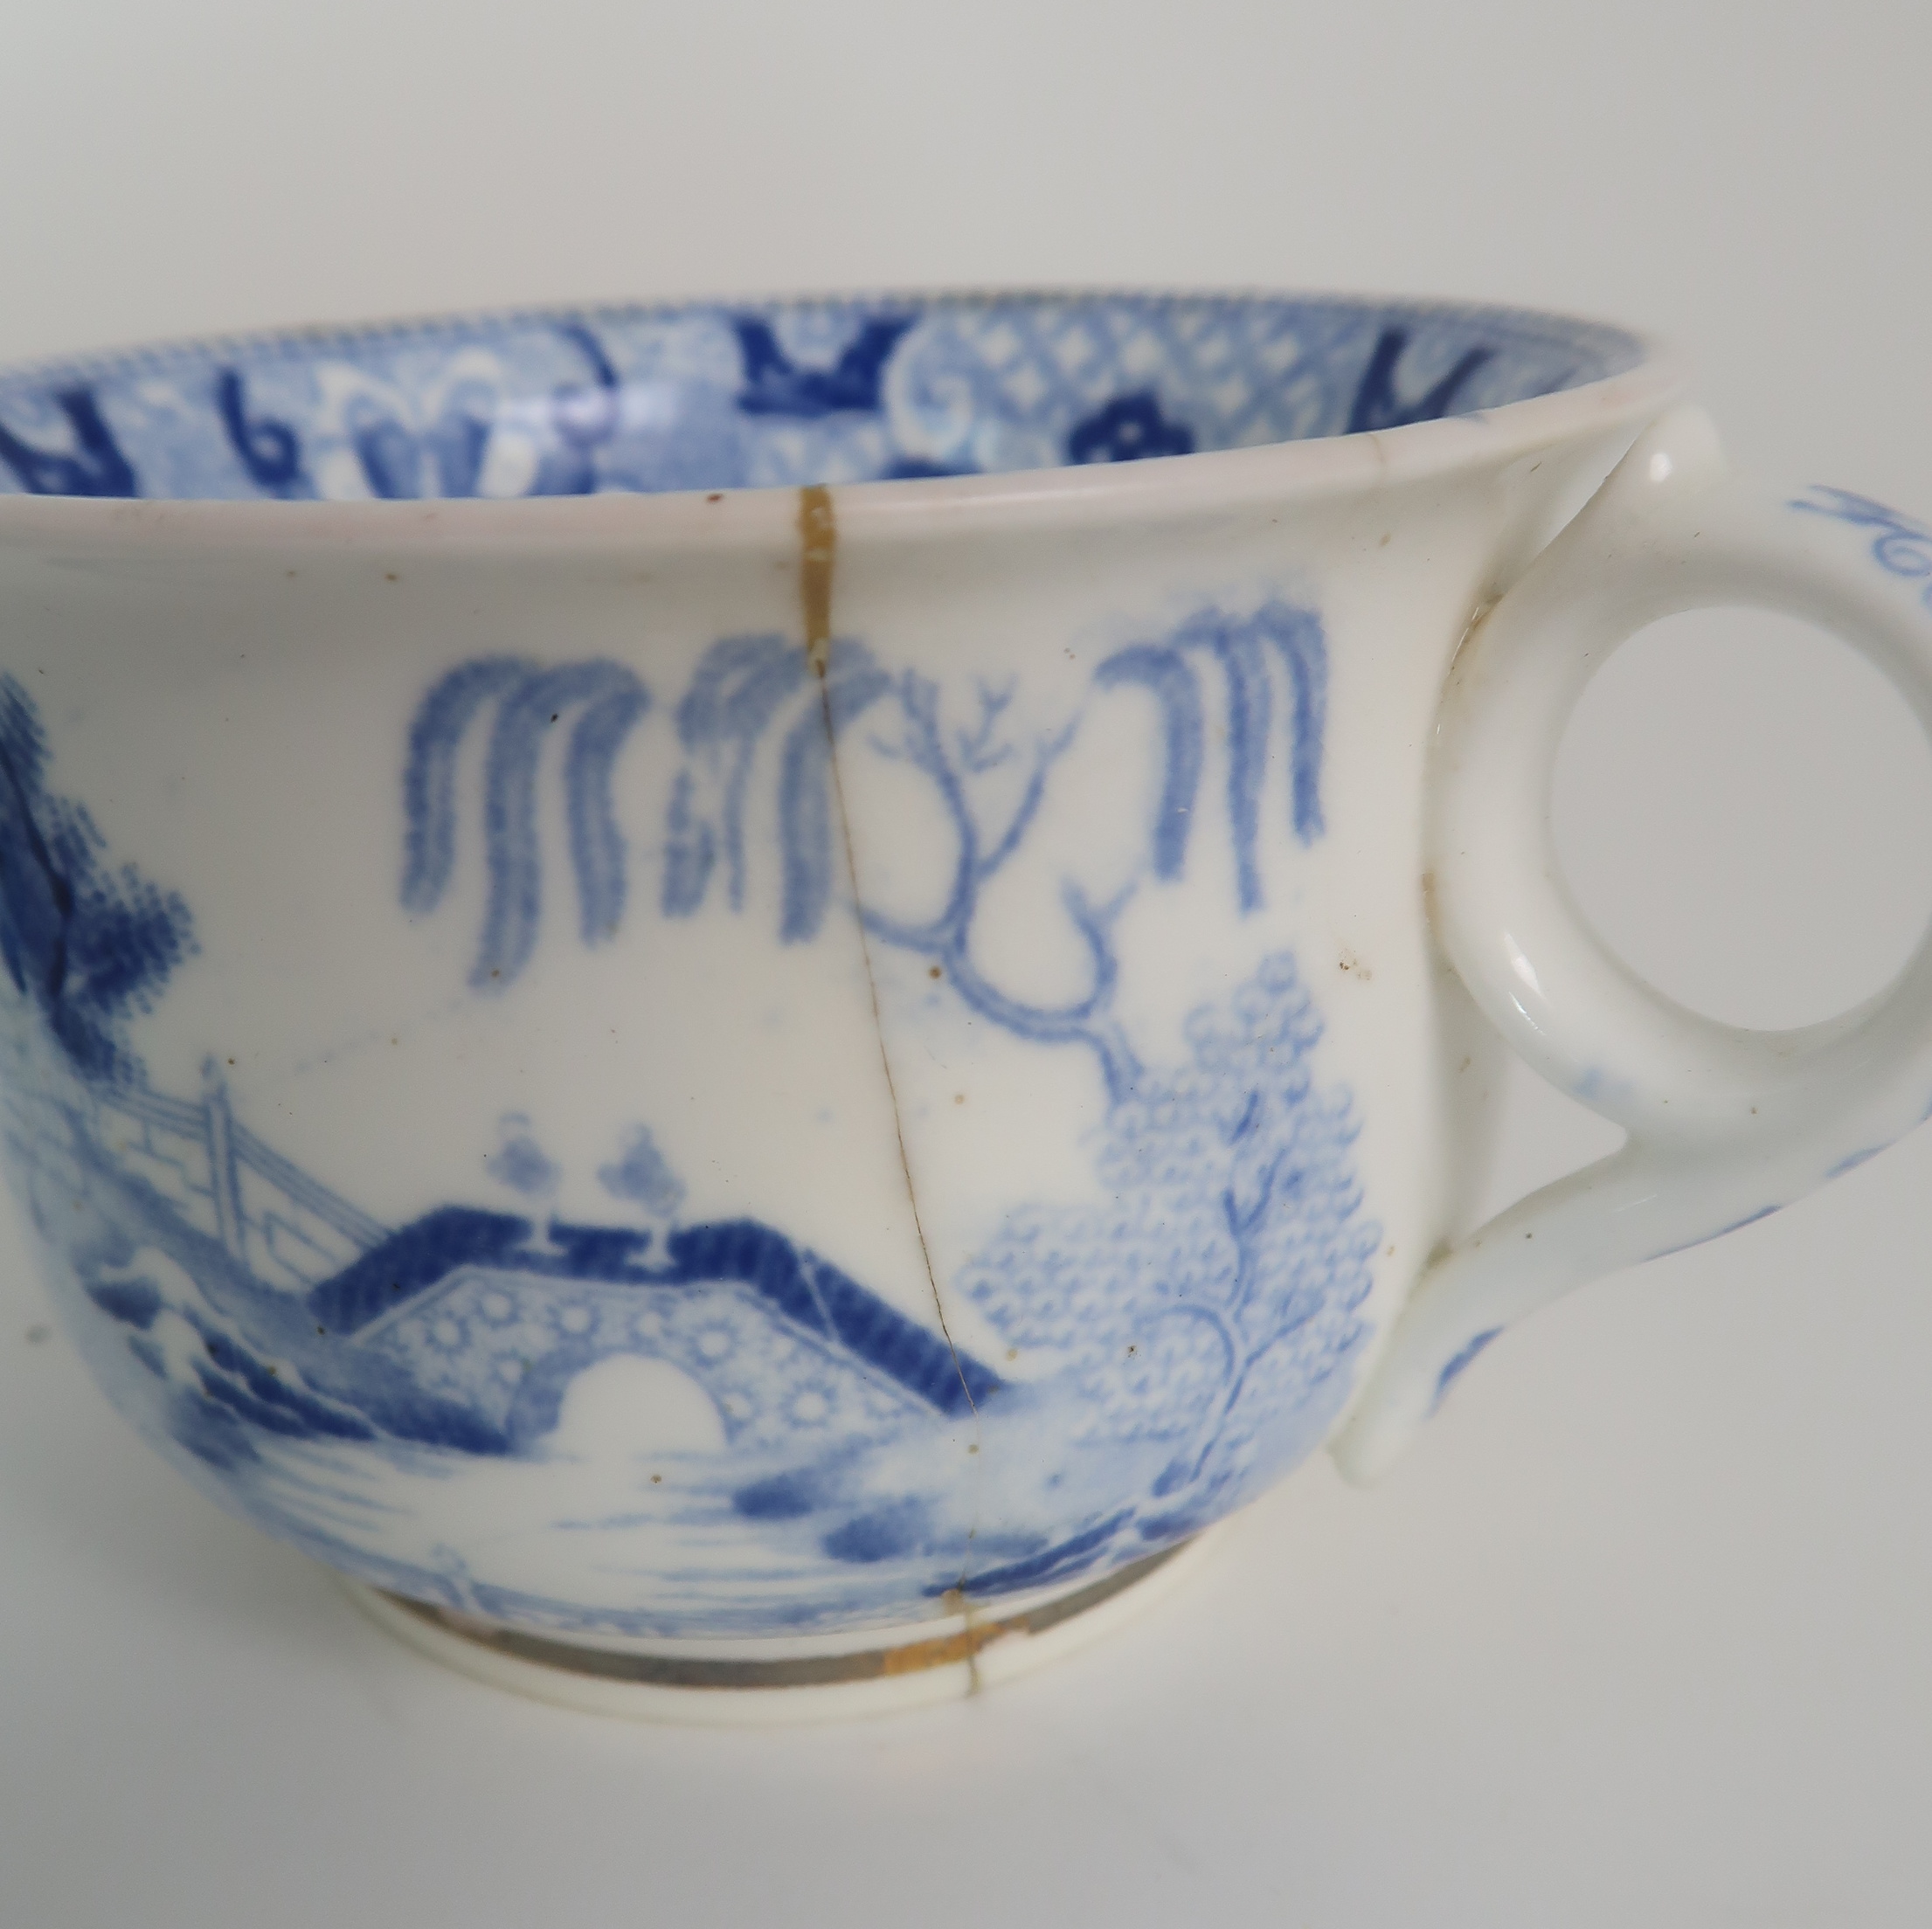 A COLLECTION OF ANTIQUE AND LATER ENGLISH BLUE AND WHITE PORCELAIN TEA/COFFEE WARES including - Image 10 of 20